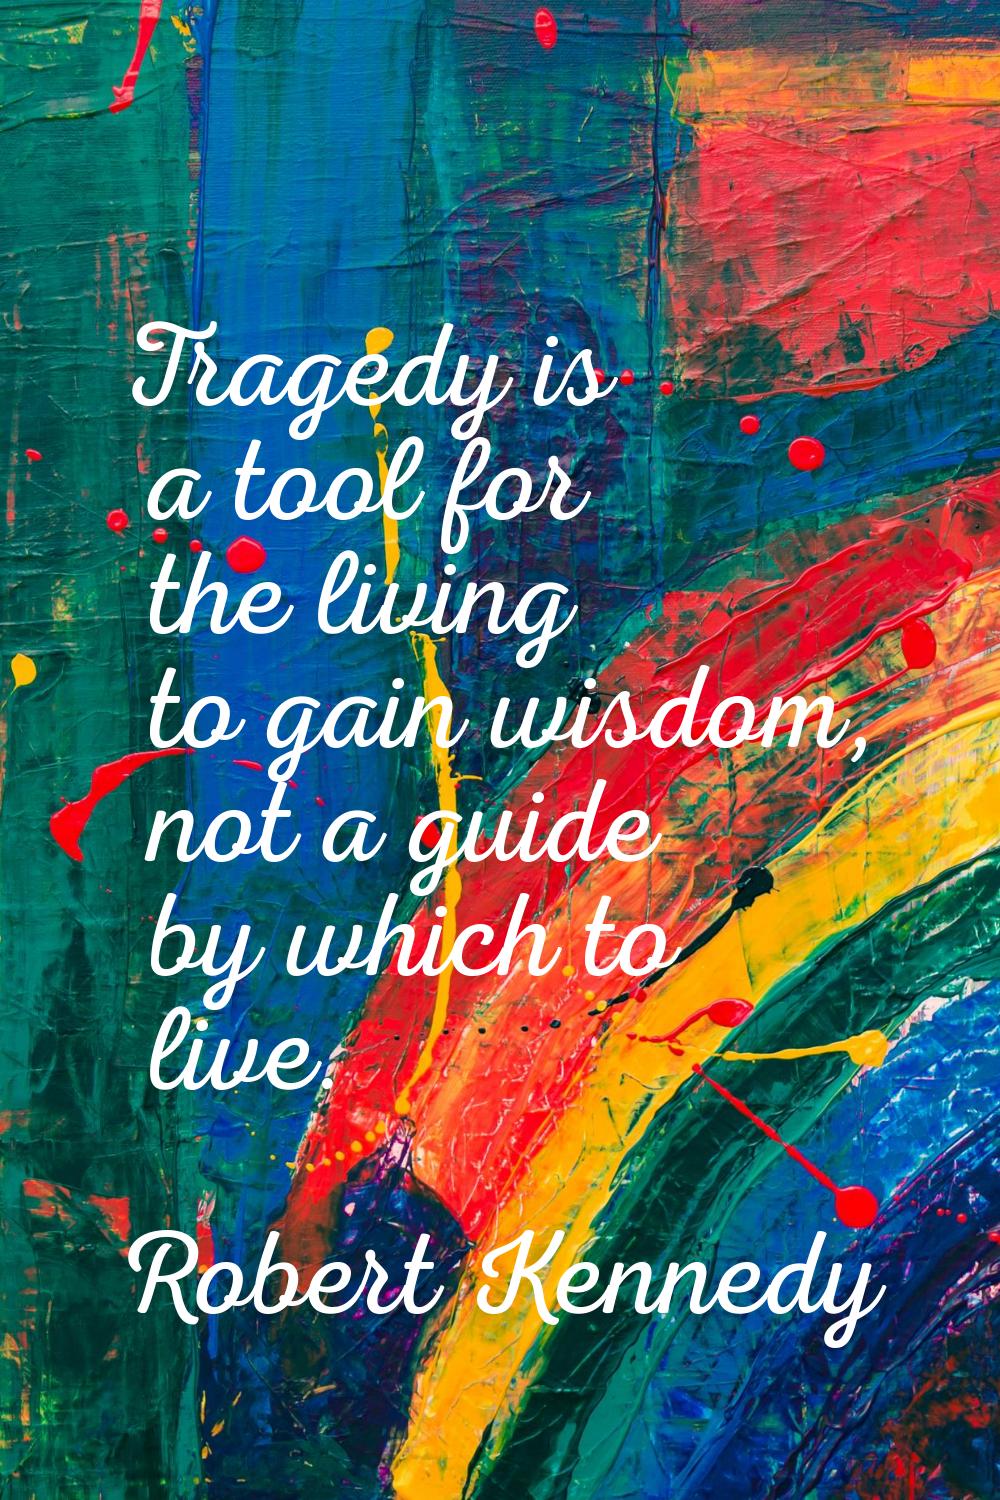 Tragedy is a tool for the living to gain wisdom, not a guide by which to live.